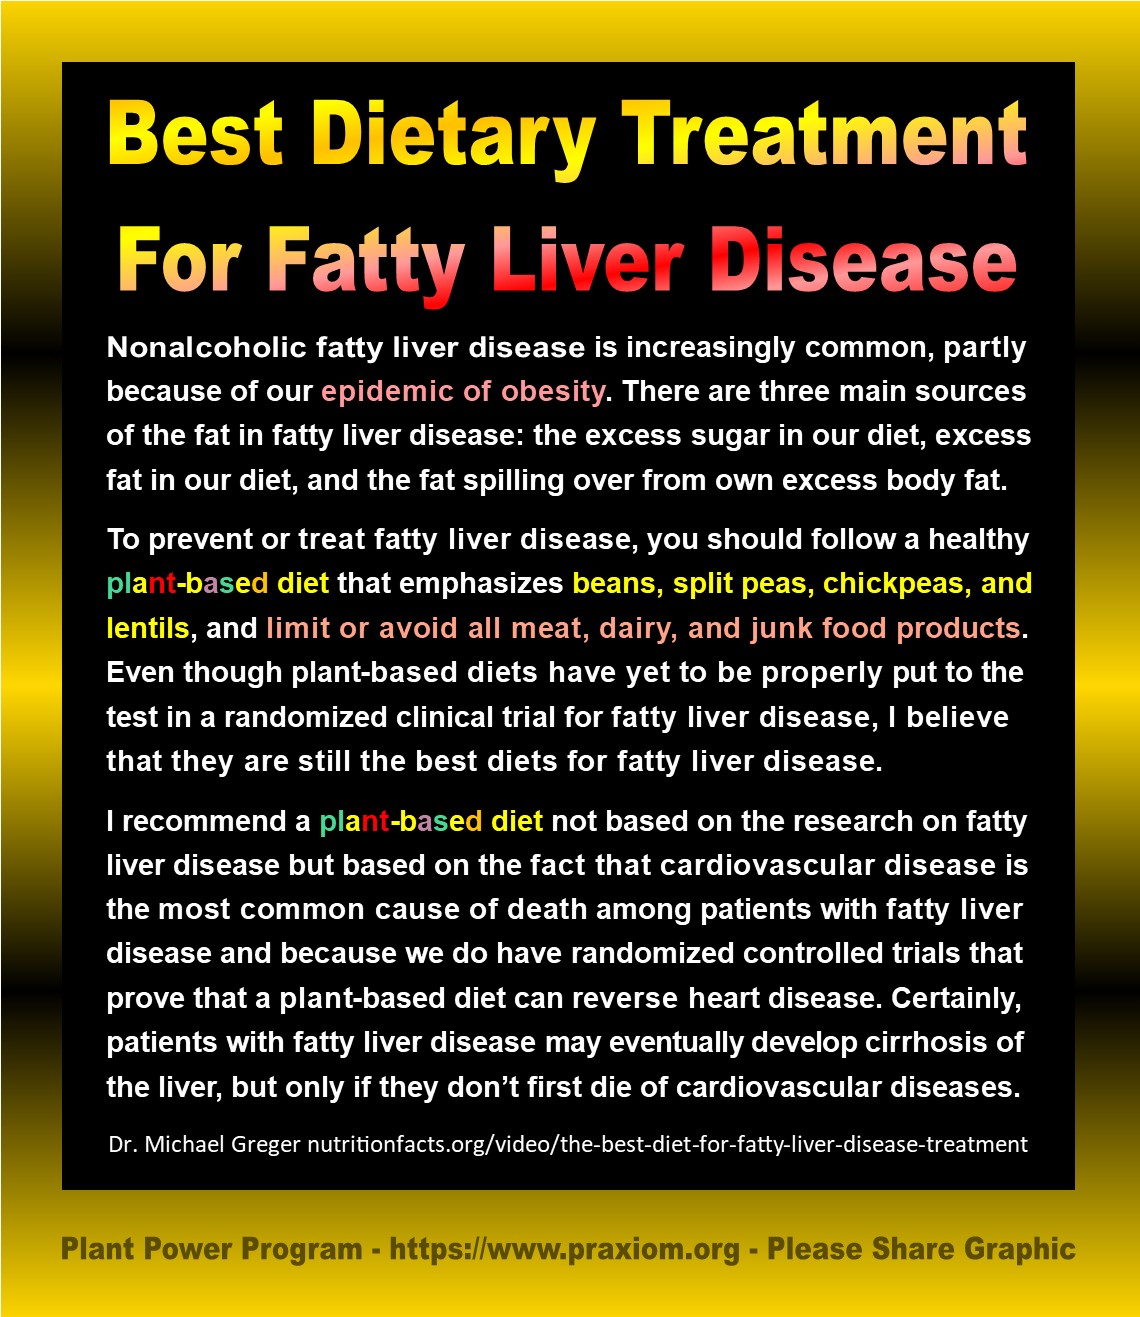 Best Dietary Treatment for Fatty Liver Disease - Dr. Michael Greger